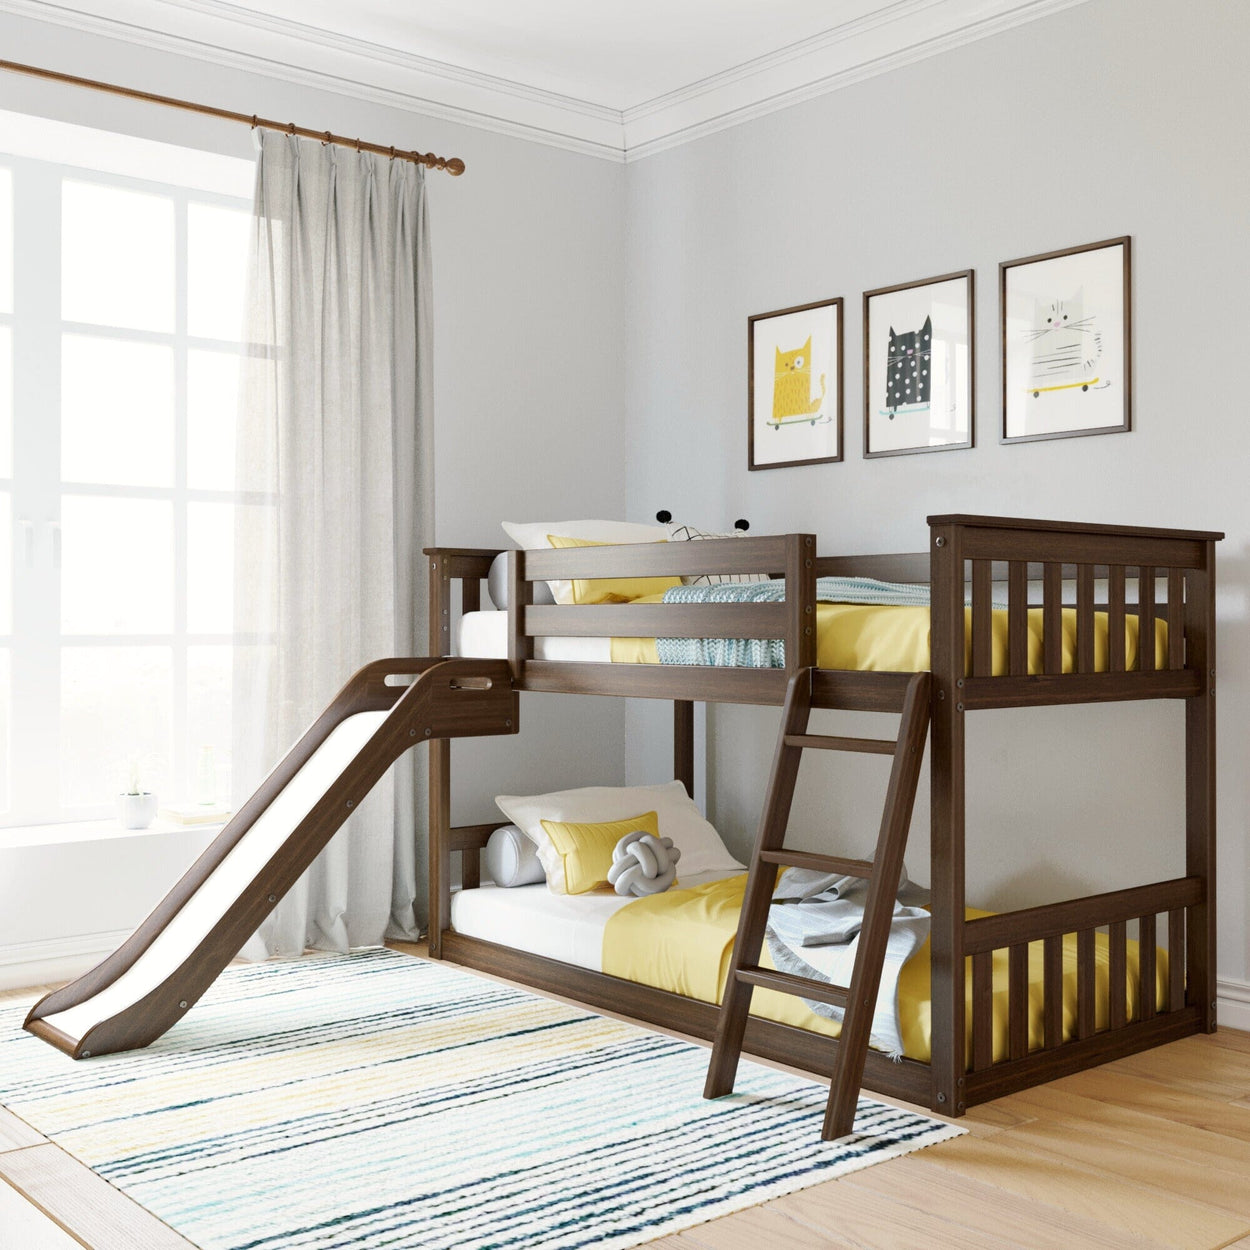 180417-008 : Bunk Beds Max & Lily Twin Over Twin Low Bunk with Slide and Ladder, Wooden Bunk beds with 14” Safety Guardrail for Kids, Toddlers, Boys, Girls, Teens, Bedroom Furniture, Walnut